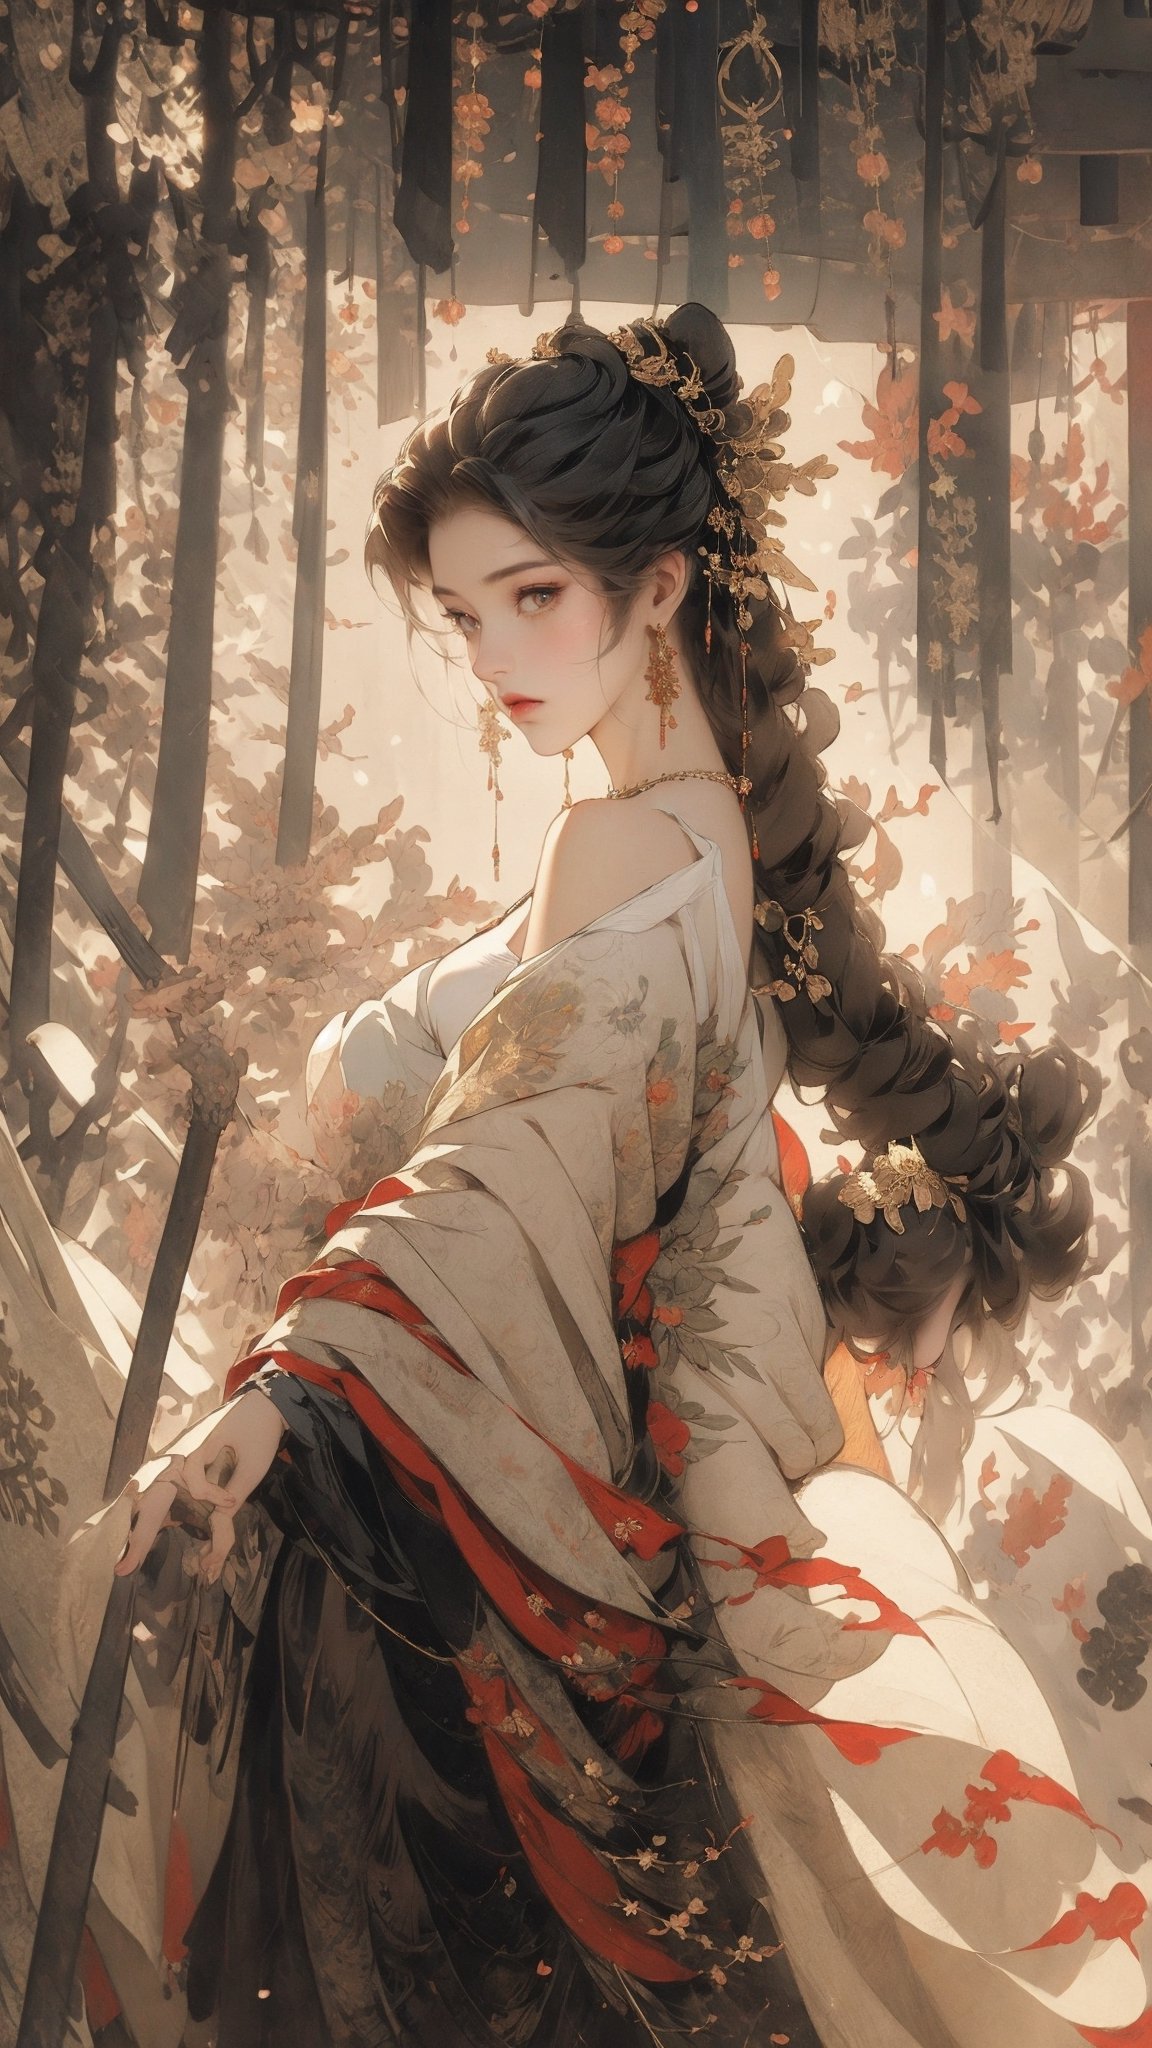 (Extremely detailed CG unified 8k wallpaper), ANCIENT_CHINESE_CASTLE_GARDEN_BACKGROUND, (((Masterpiece))), (((Best Quality))), ((Super Detailed)), (Best Illustration), (Best Shading), ( (Extremely exquisite and beautiful)), embodying the charm of ancient princesses, exuding beauty, sexiness and charm, with natural big breasts. Mesmerizing eyes convey mystery and seduction. Elegant and charming, with a slender figure and full of mystery. Off the shoulders, low cut. Ancient traditional Hanfu decorated with intricate patterns or ornate details. Seductive and elegant pose, beautyniji